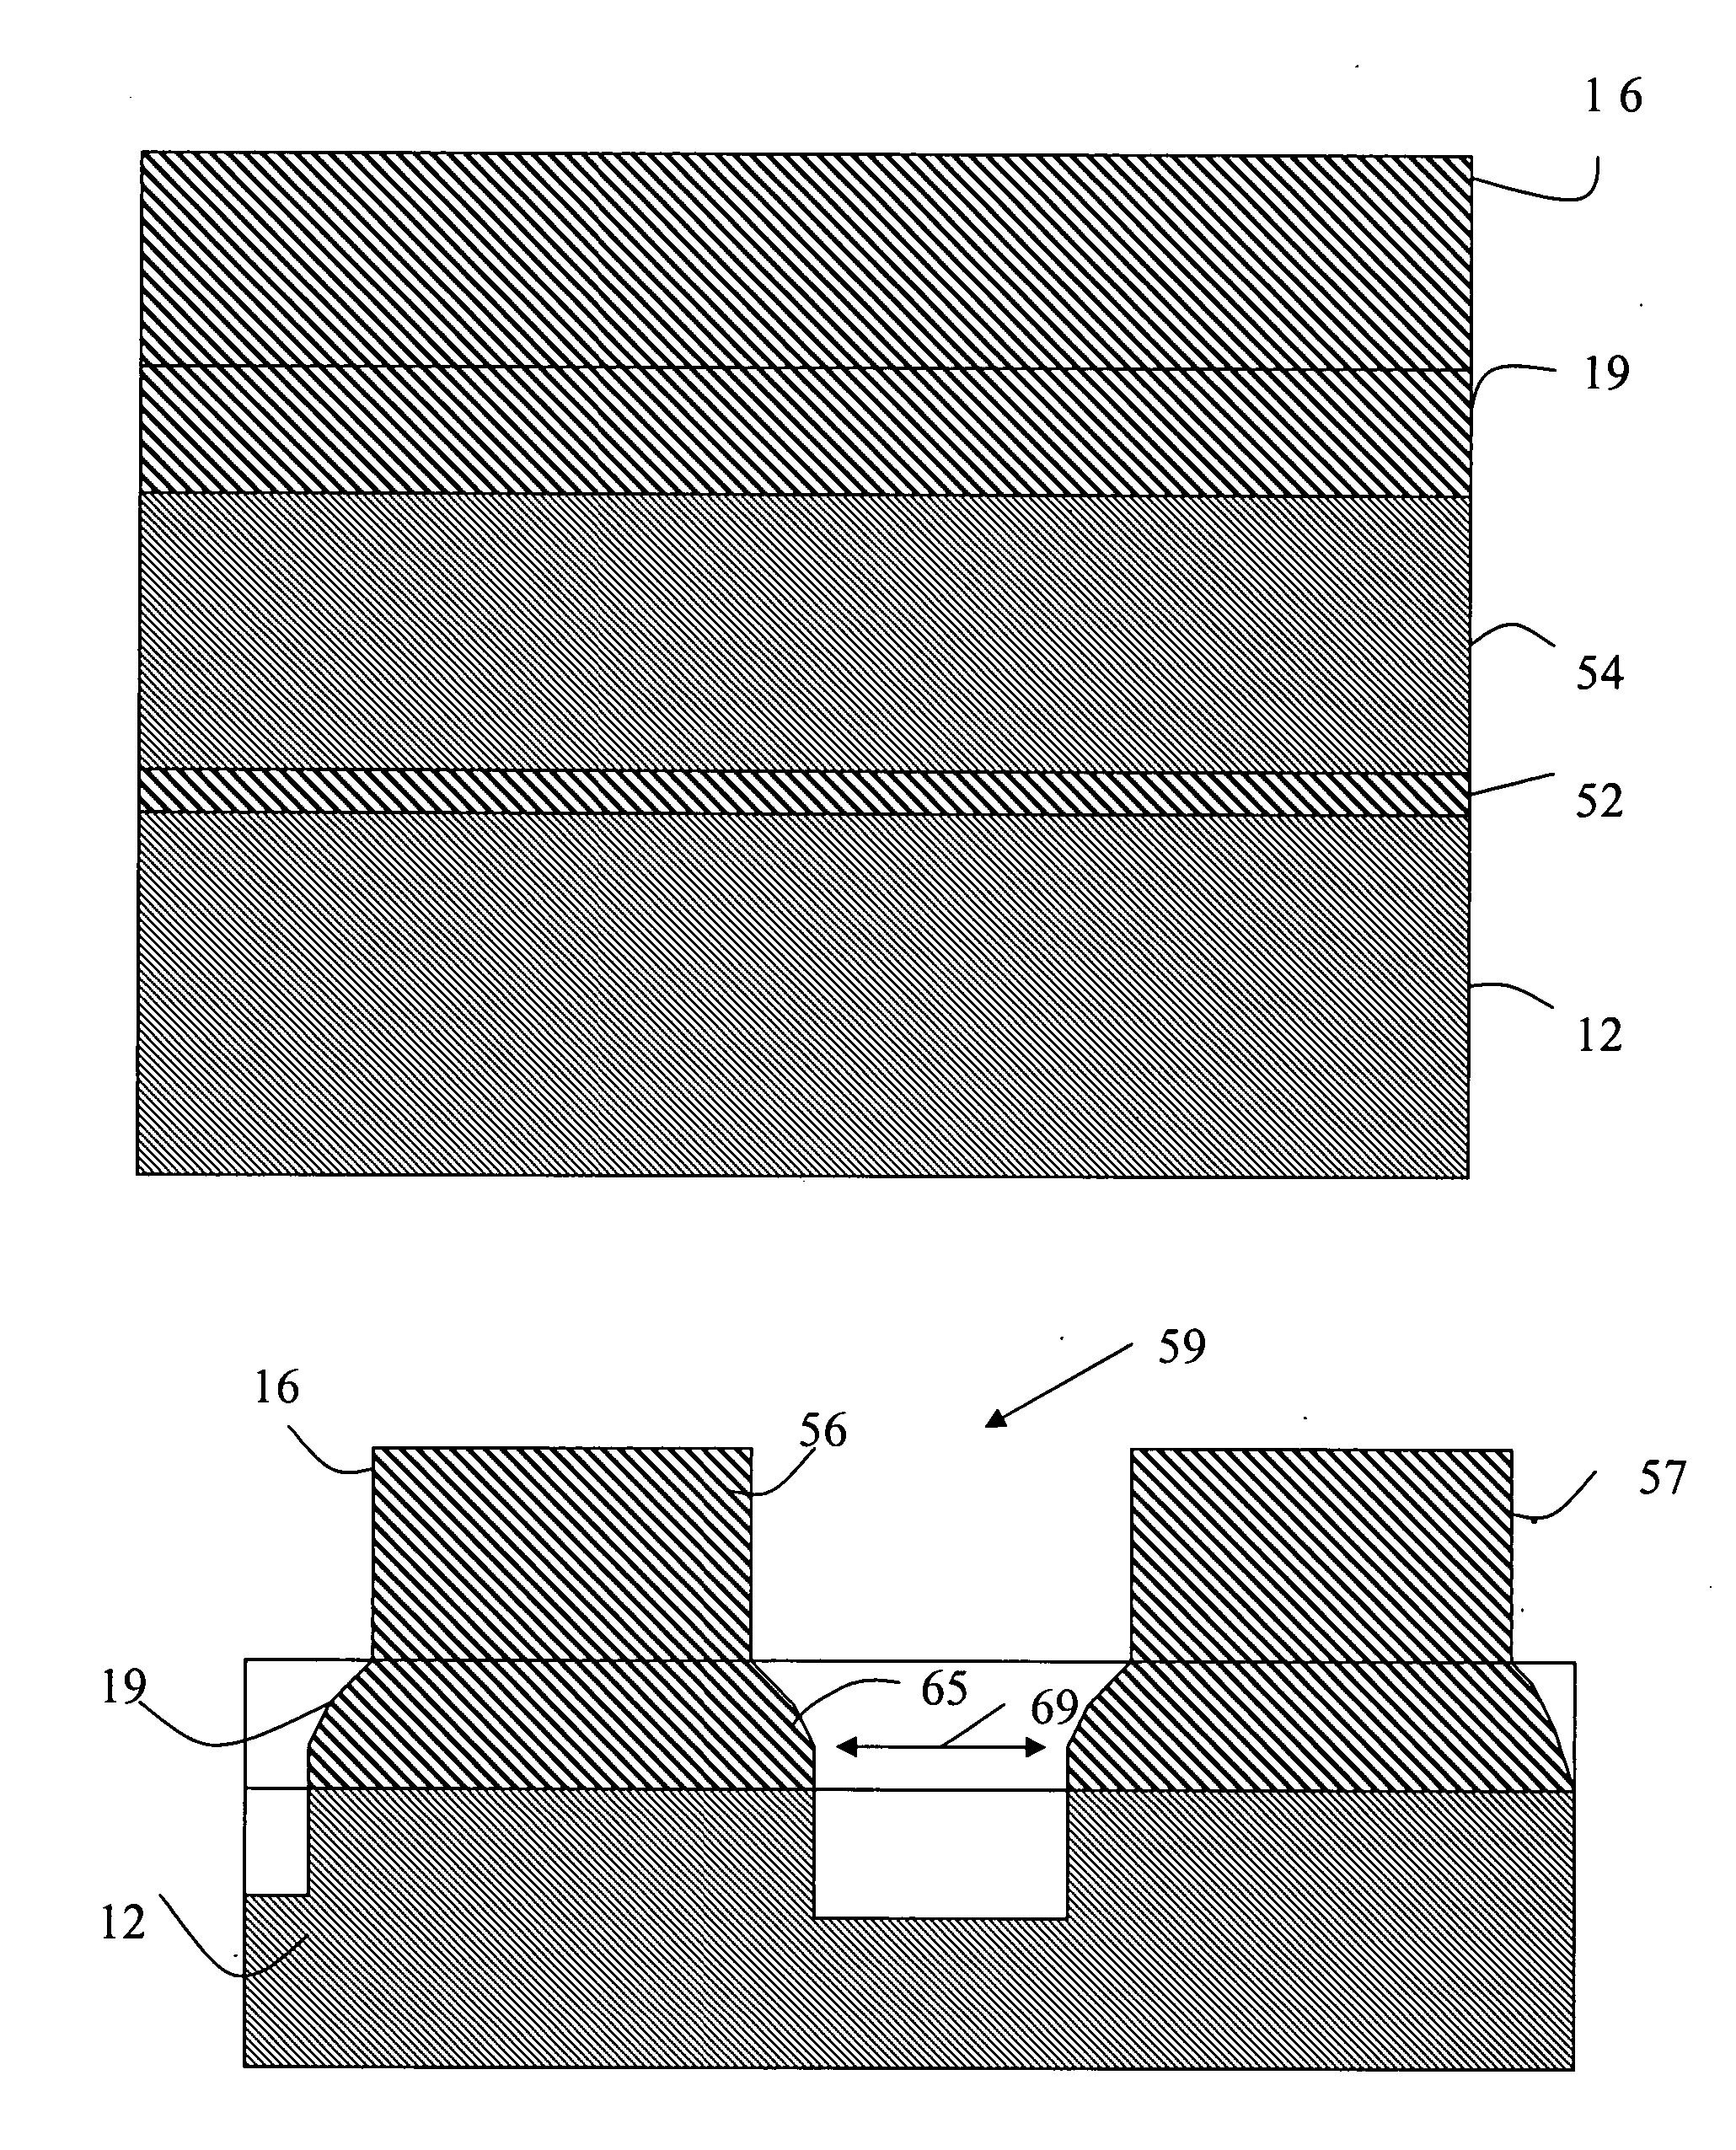 Etch process for CD reduction of arc material